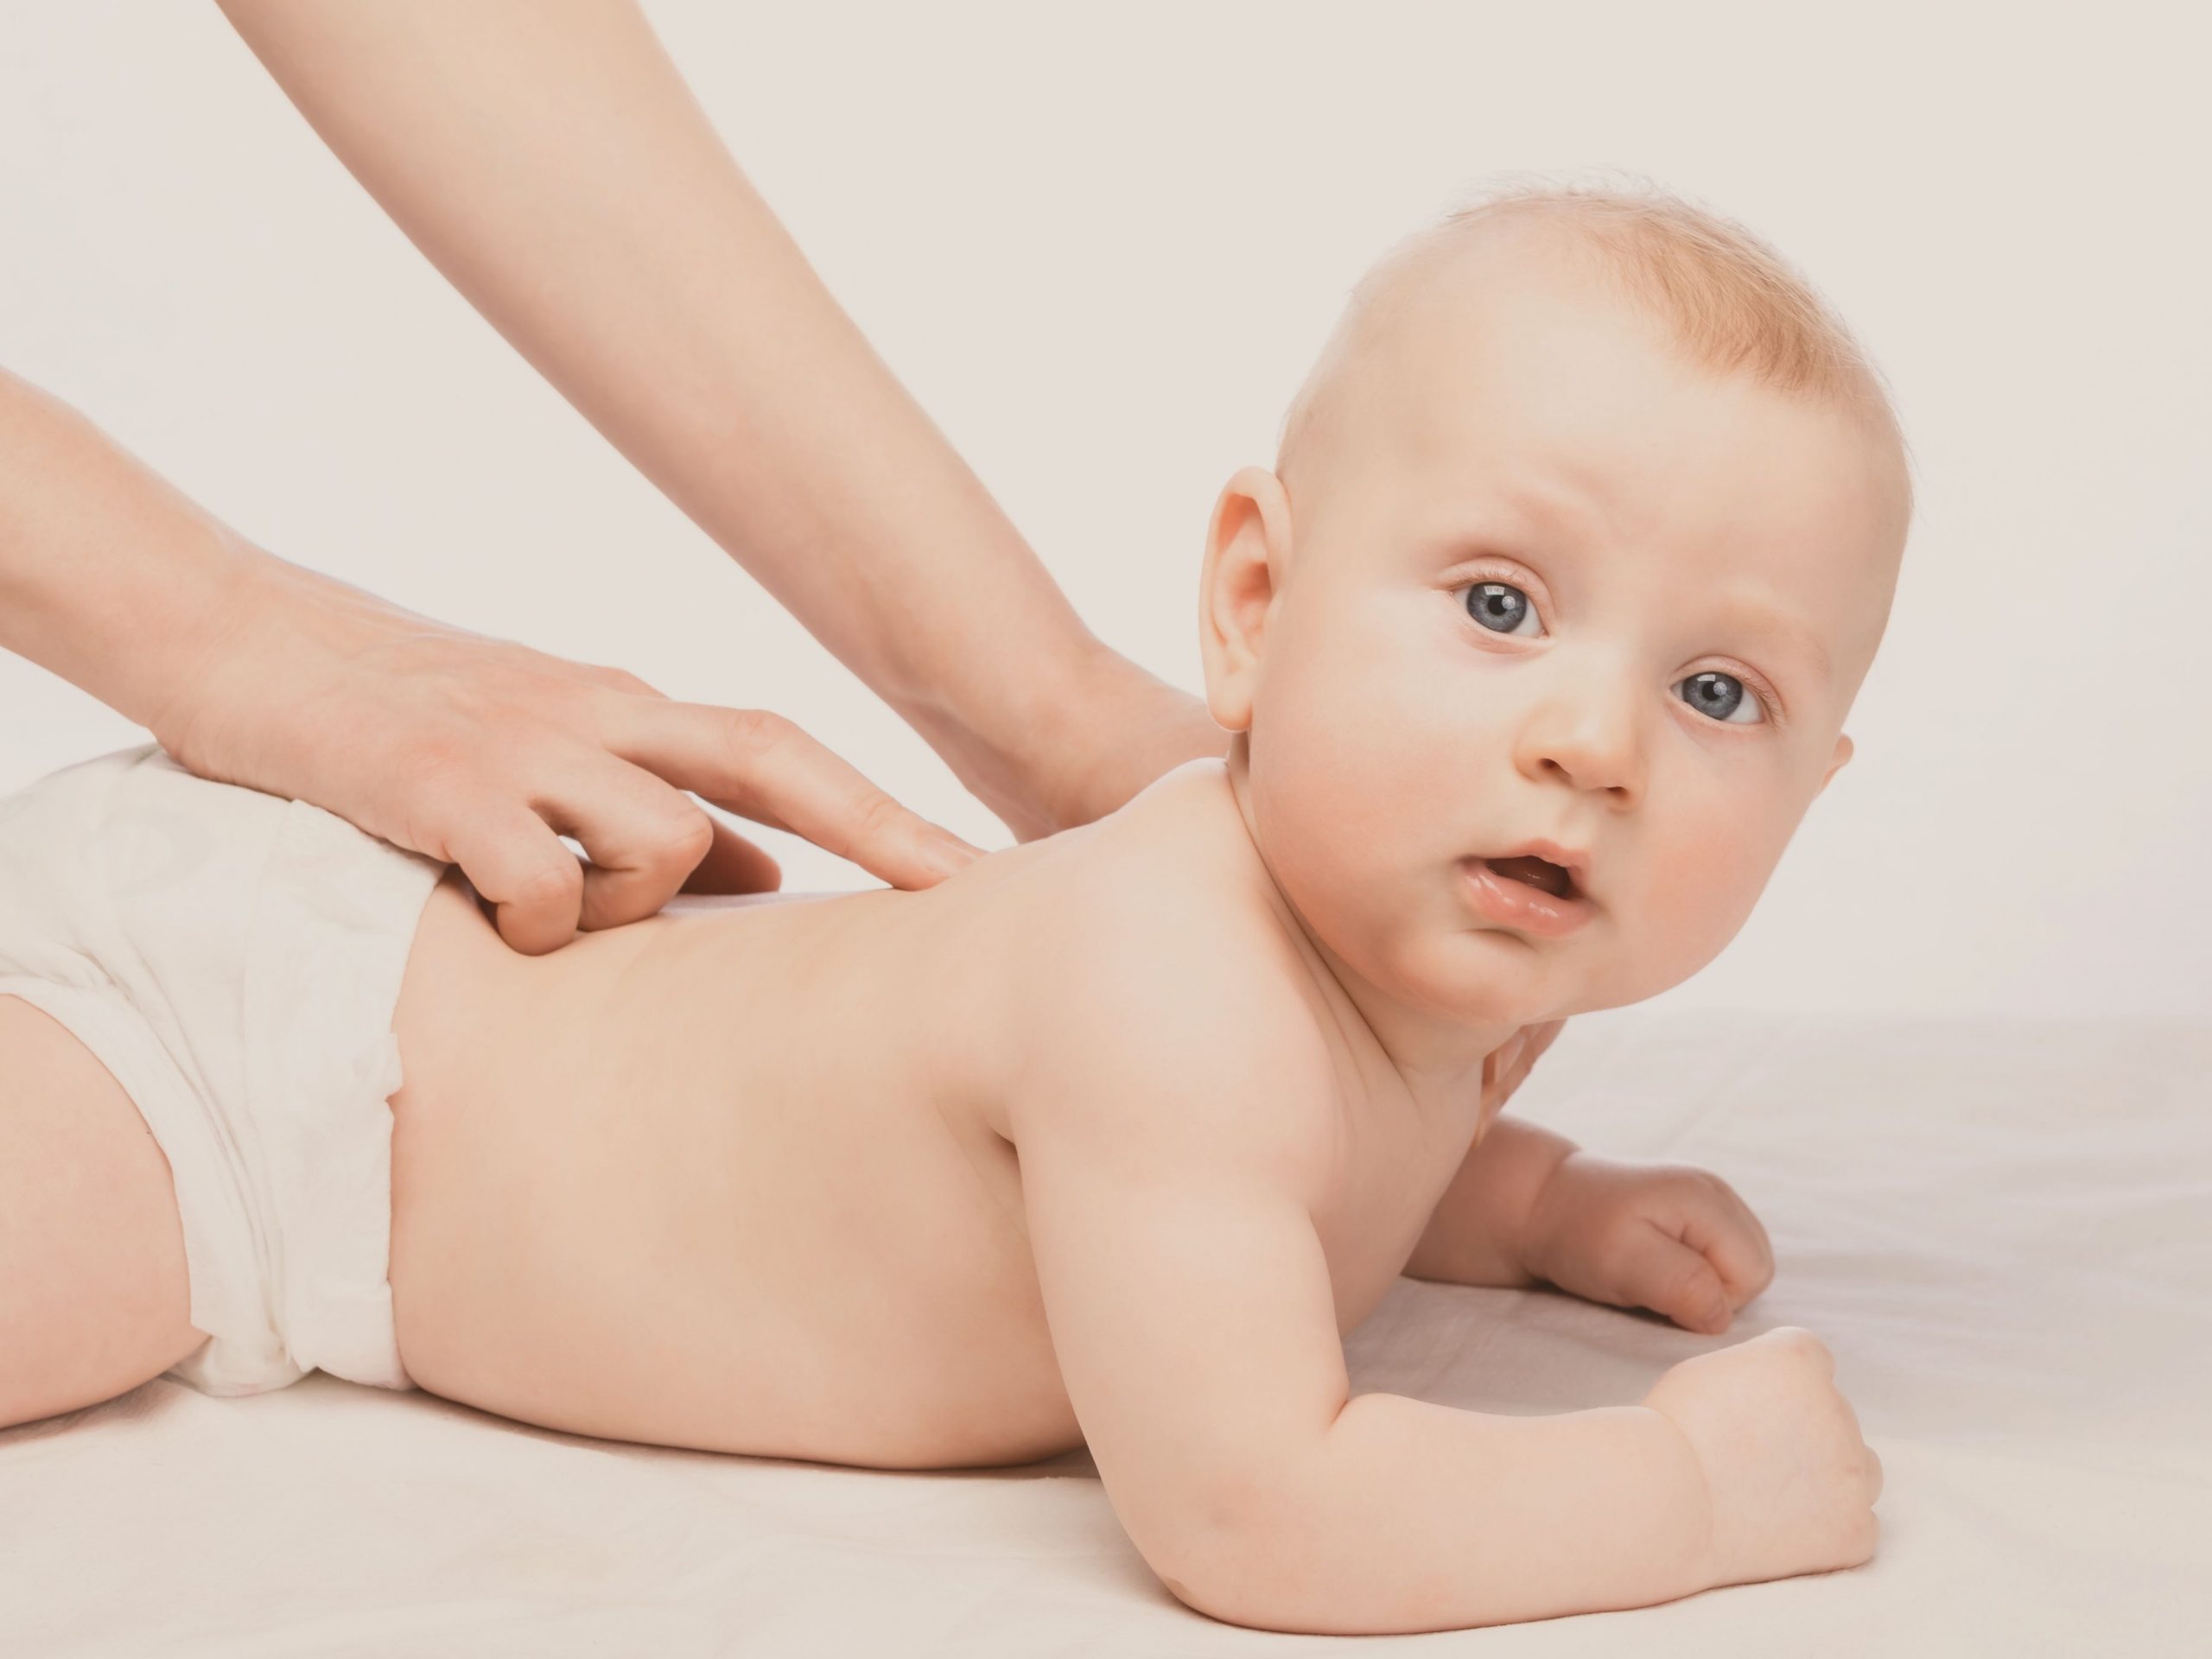 What is baby osteopathy?